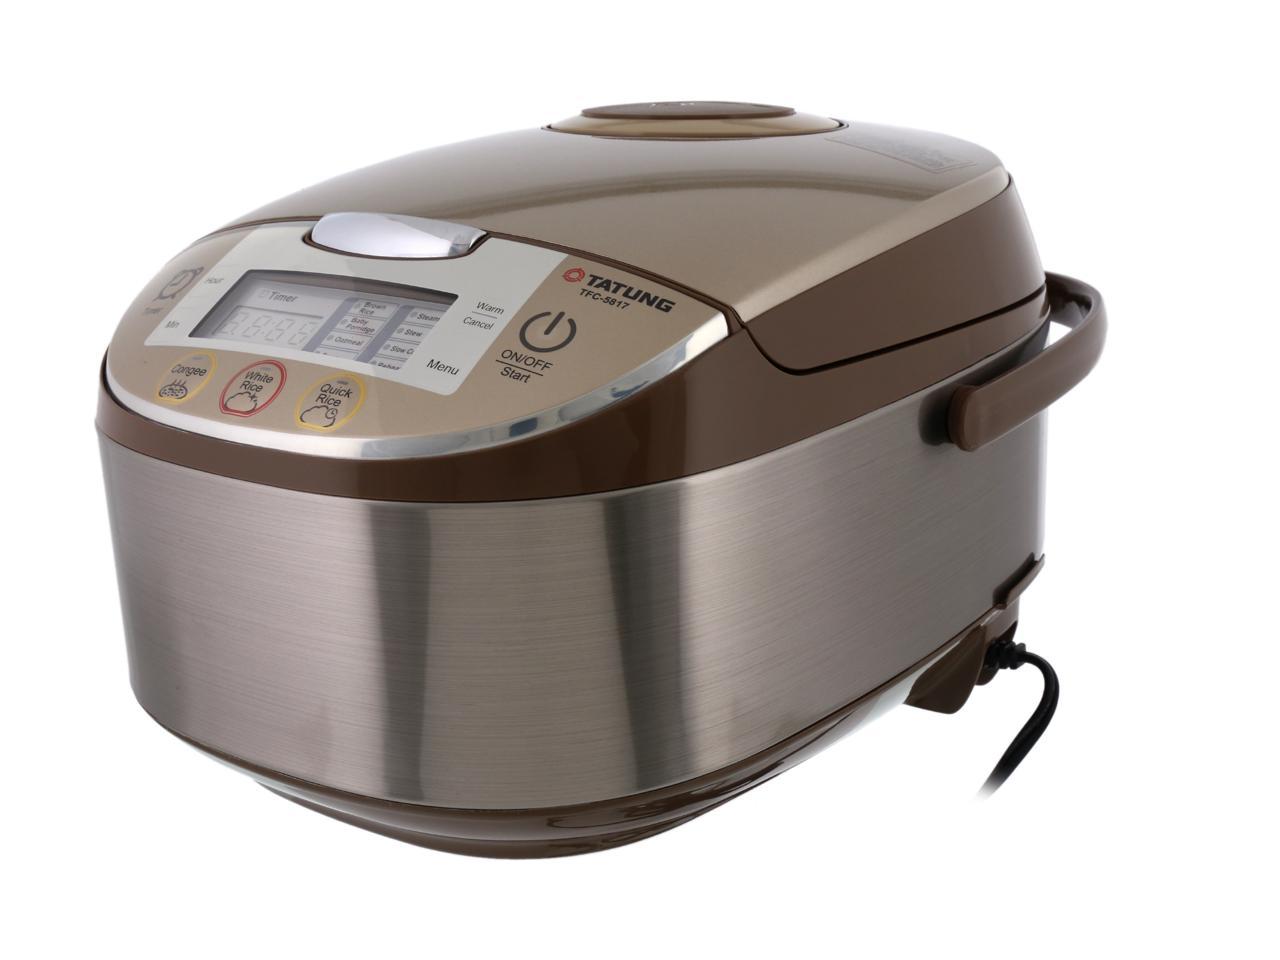 Tatung Micom Fuzzy Logic Multi-Cooker and Rice Cooker, Champagne, 16 ...